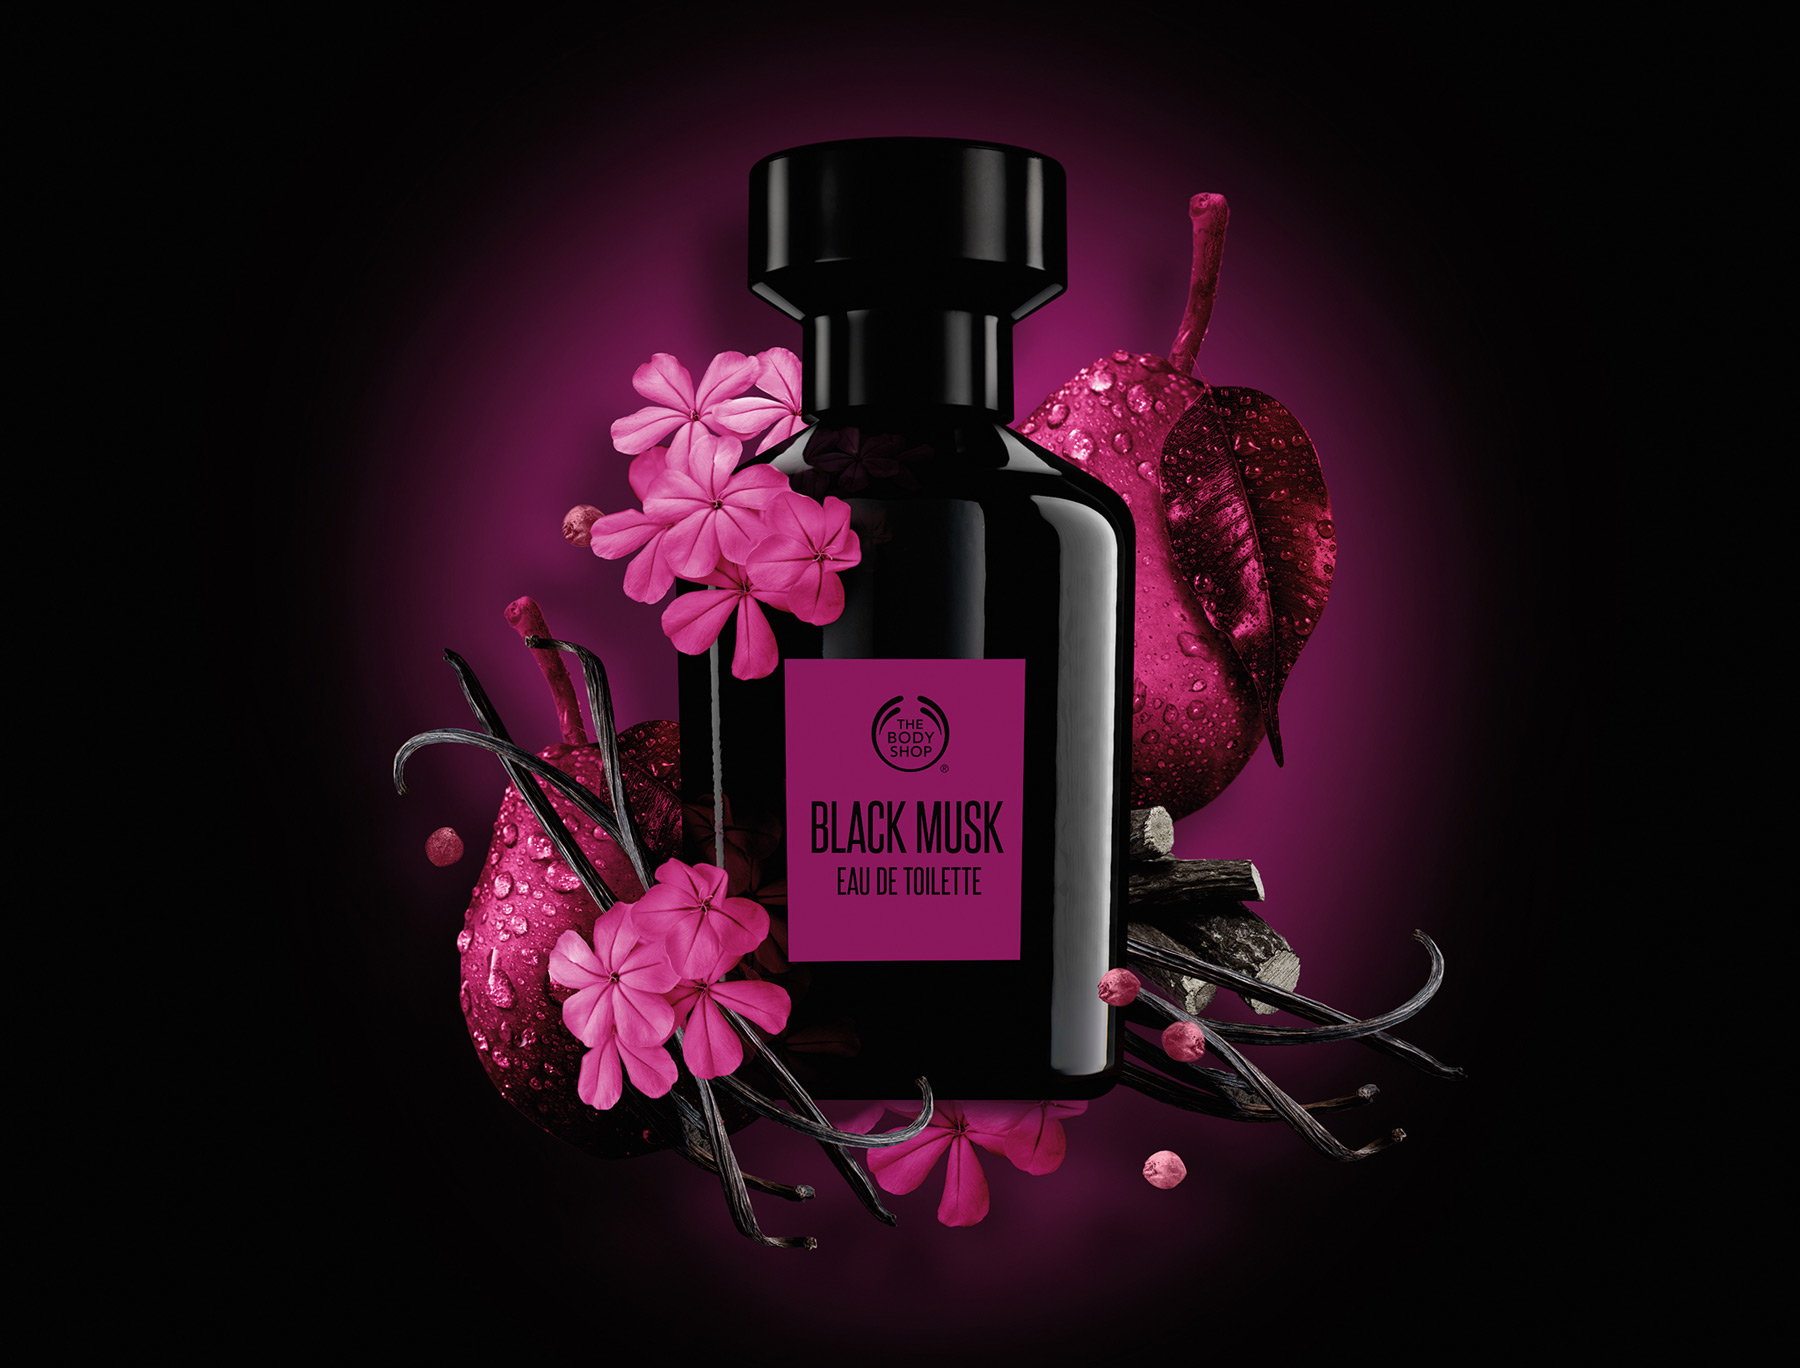 Black Musk The Body Shop perfume a new fragrance for